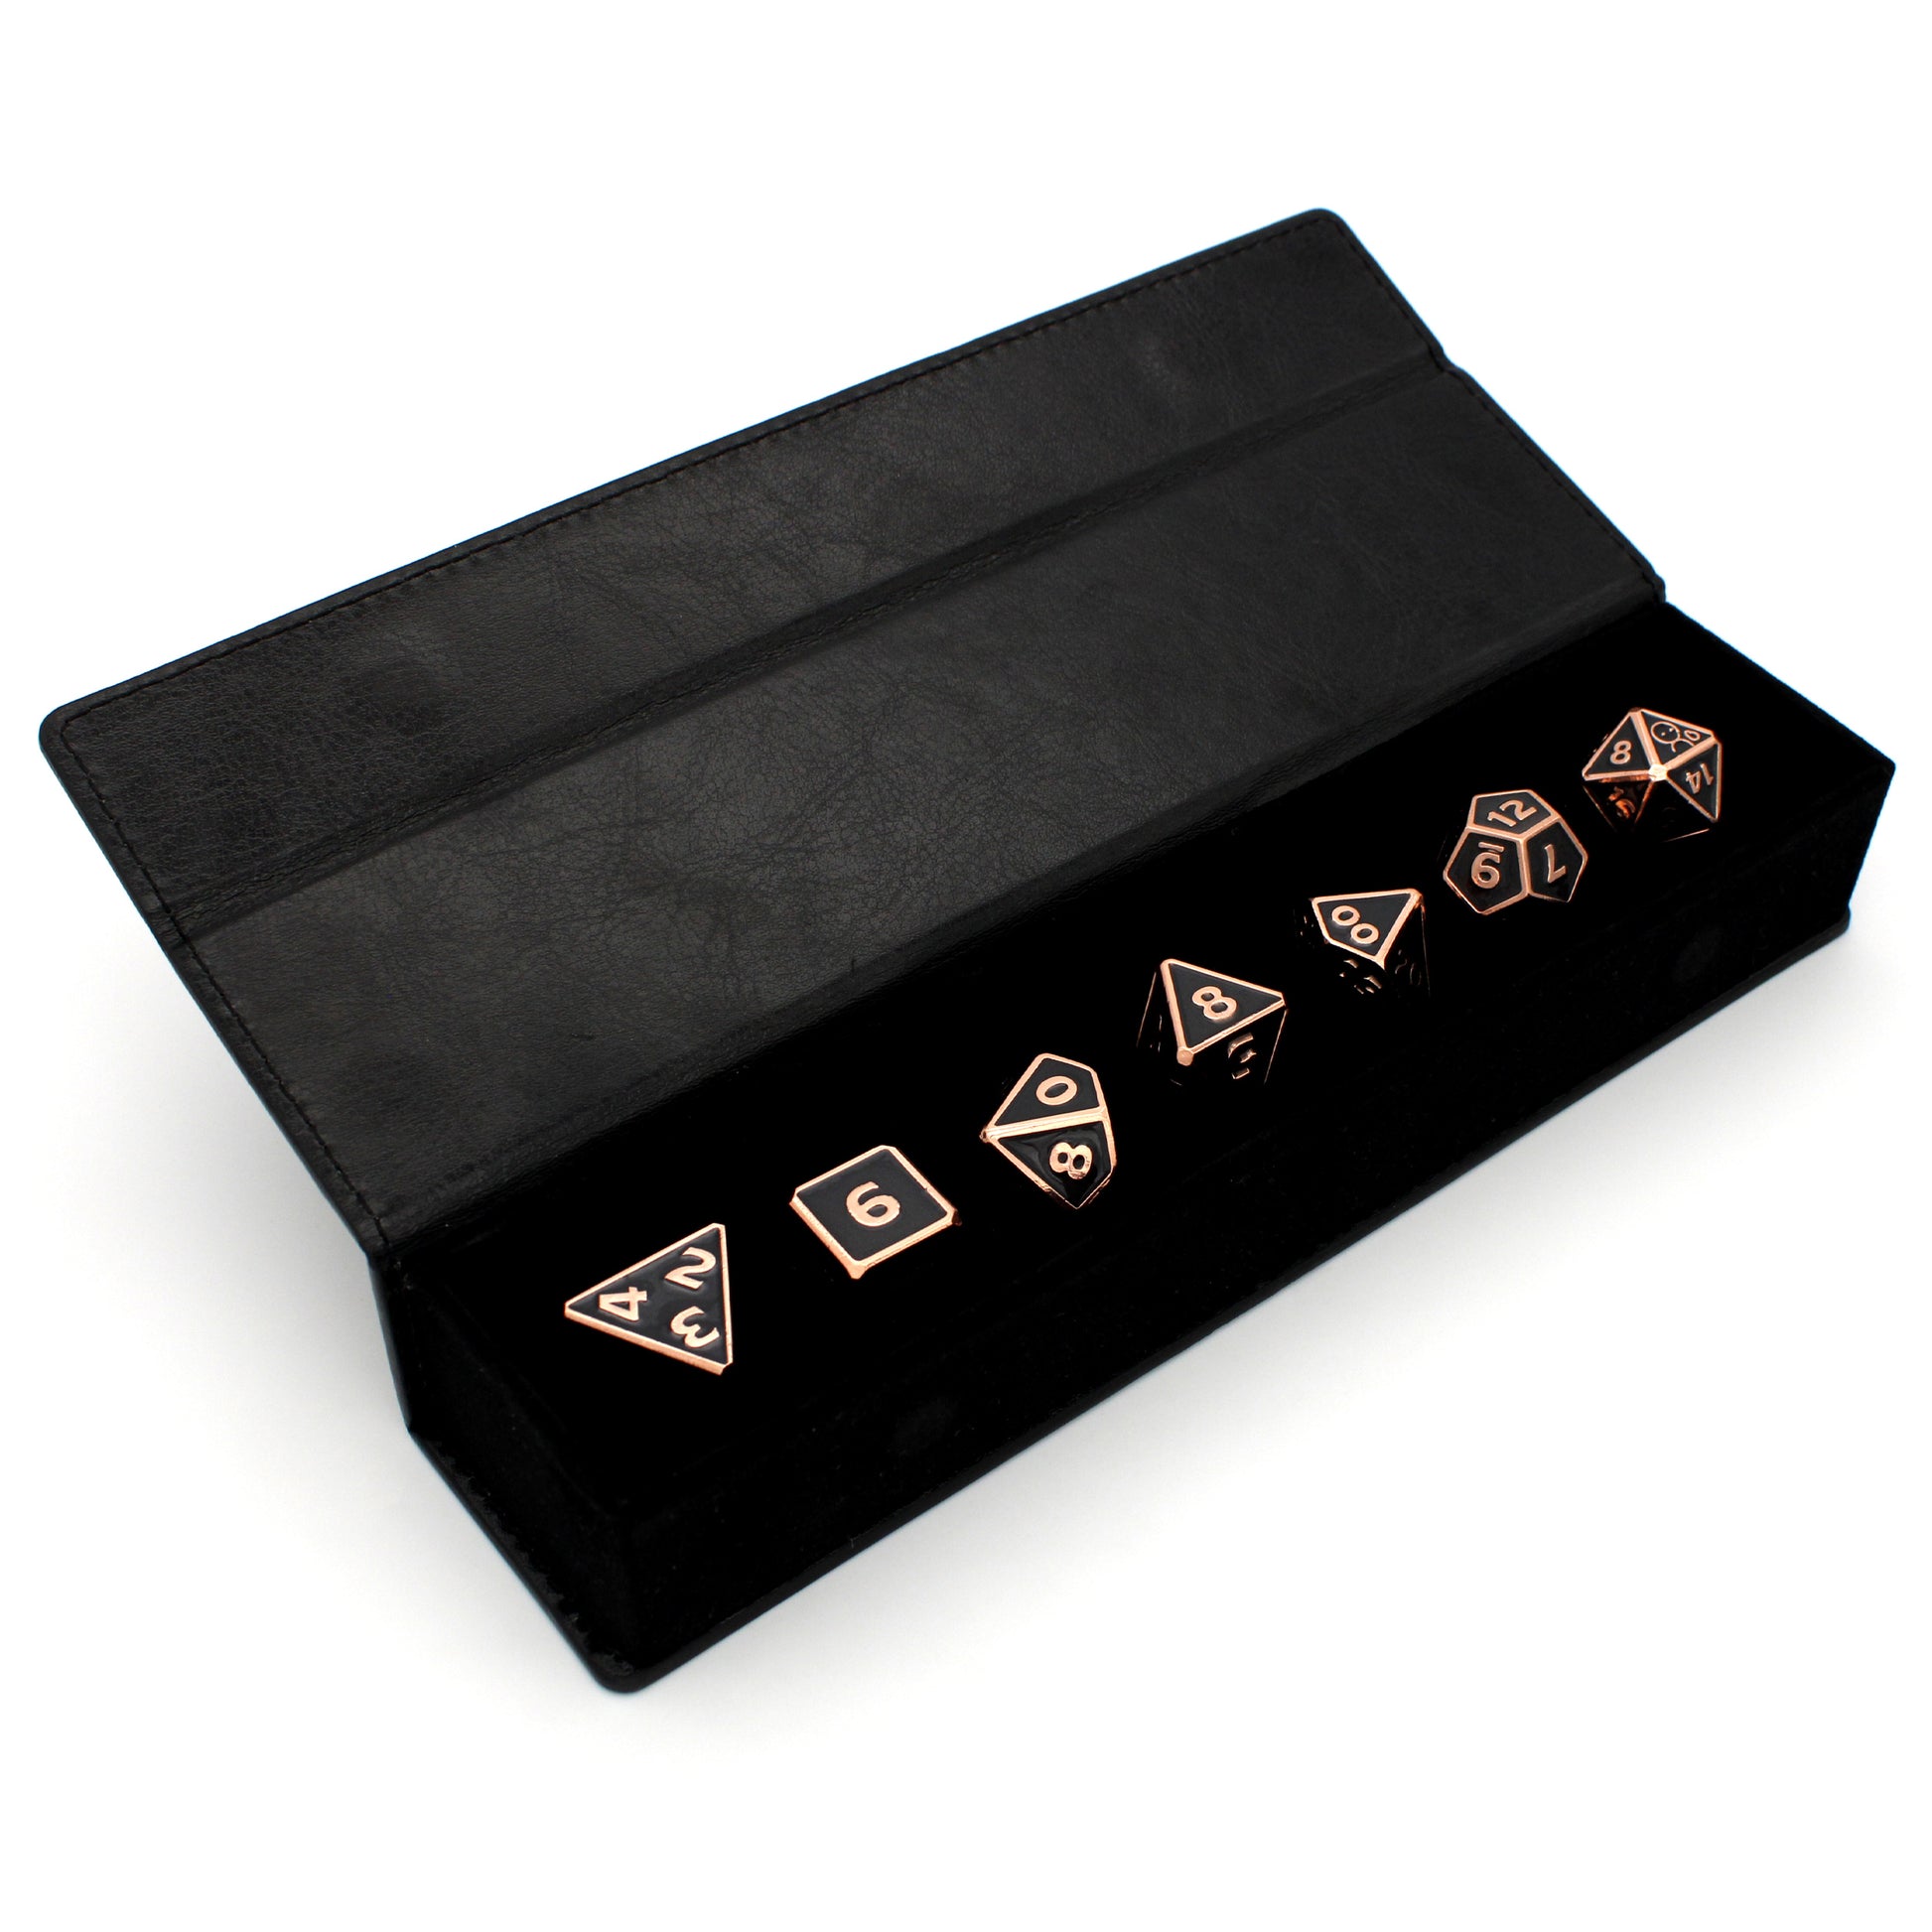 The (Mostly)Neutral DM is a 7-piece rose gold, framed metal set filled with a largely objective, grey enamel. It is part of the Adventure Is Nigh collection.